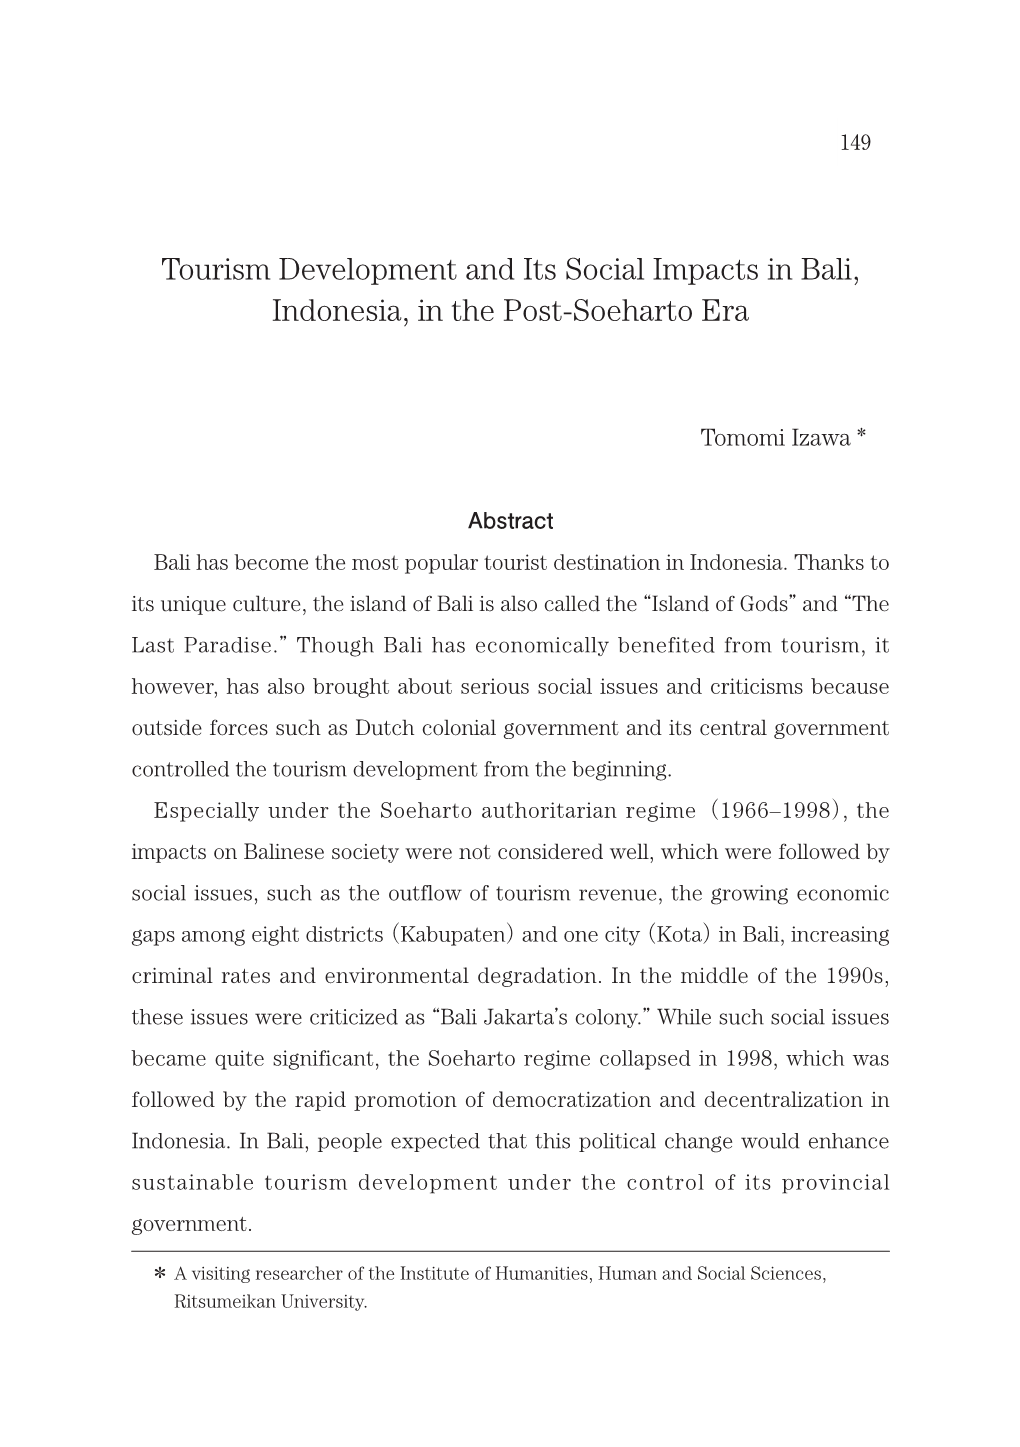 Tourism Development and Its Social Impacts in Bali, Indonesia, in the Post-Soeharto Era 149